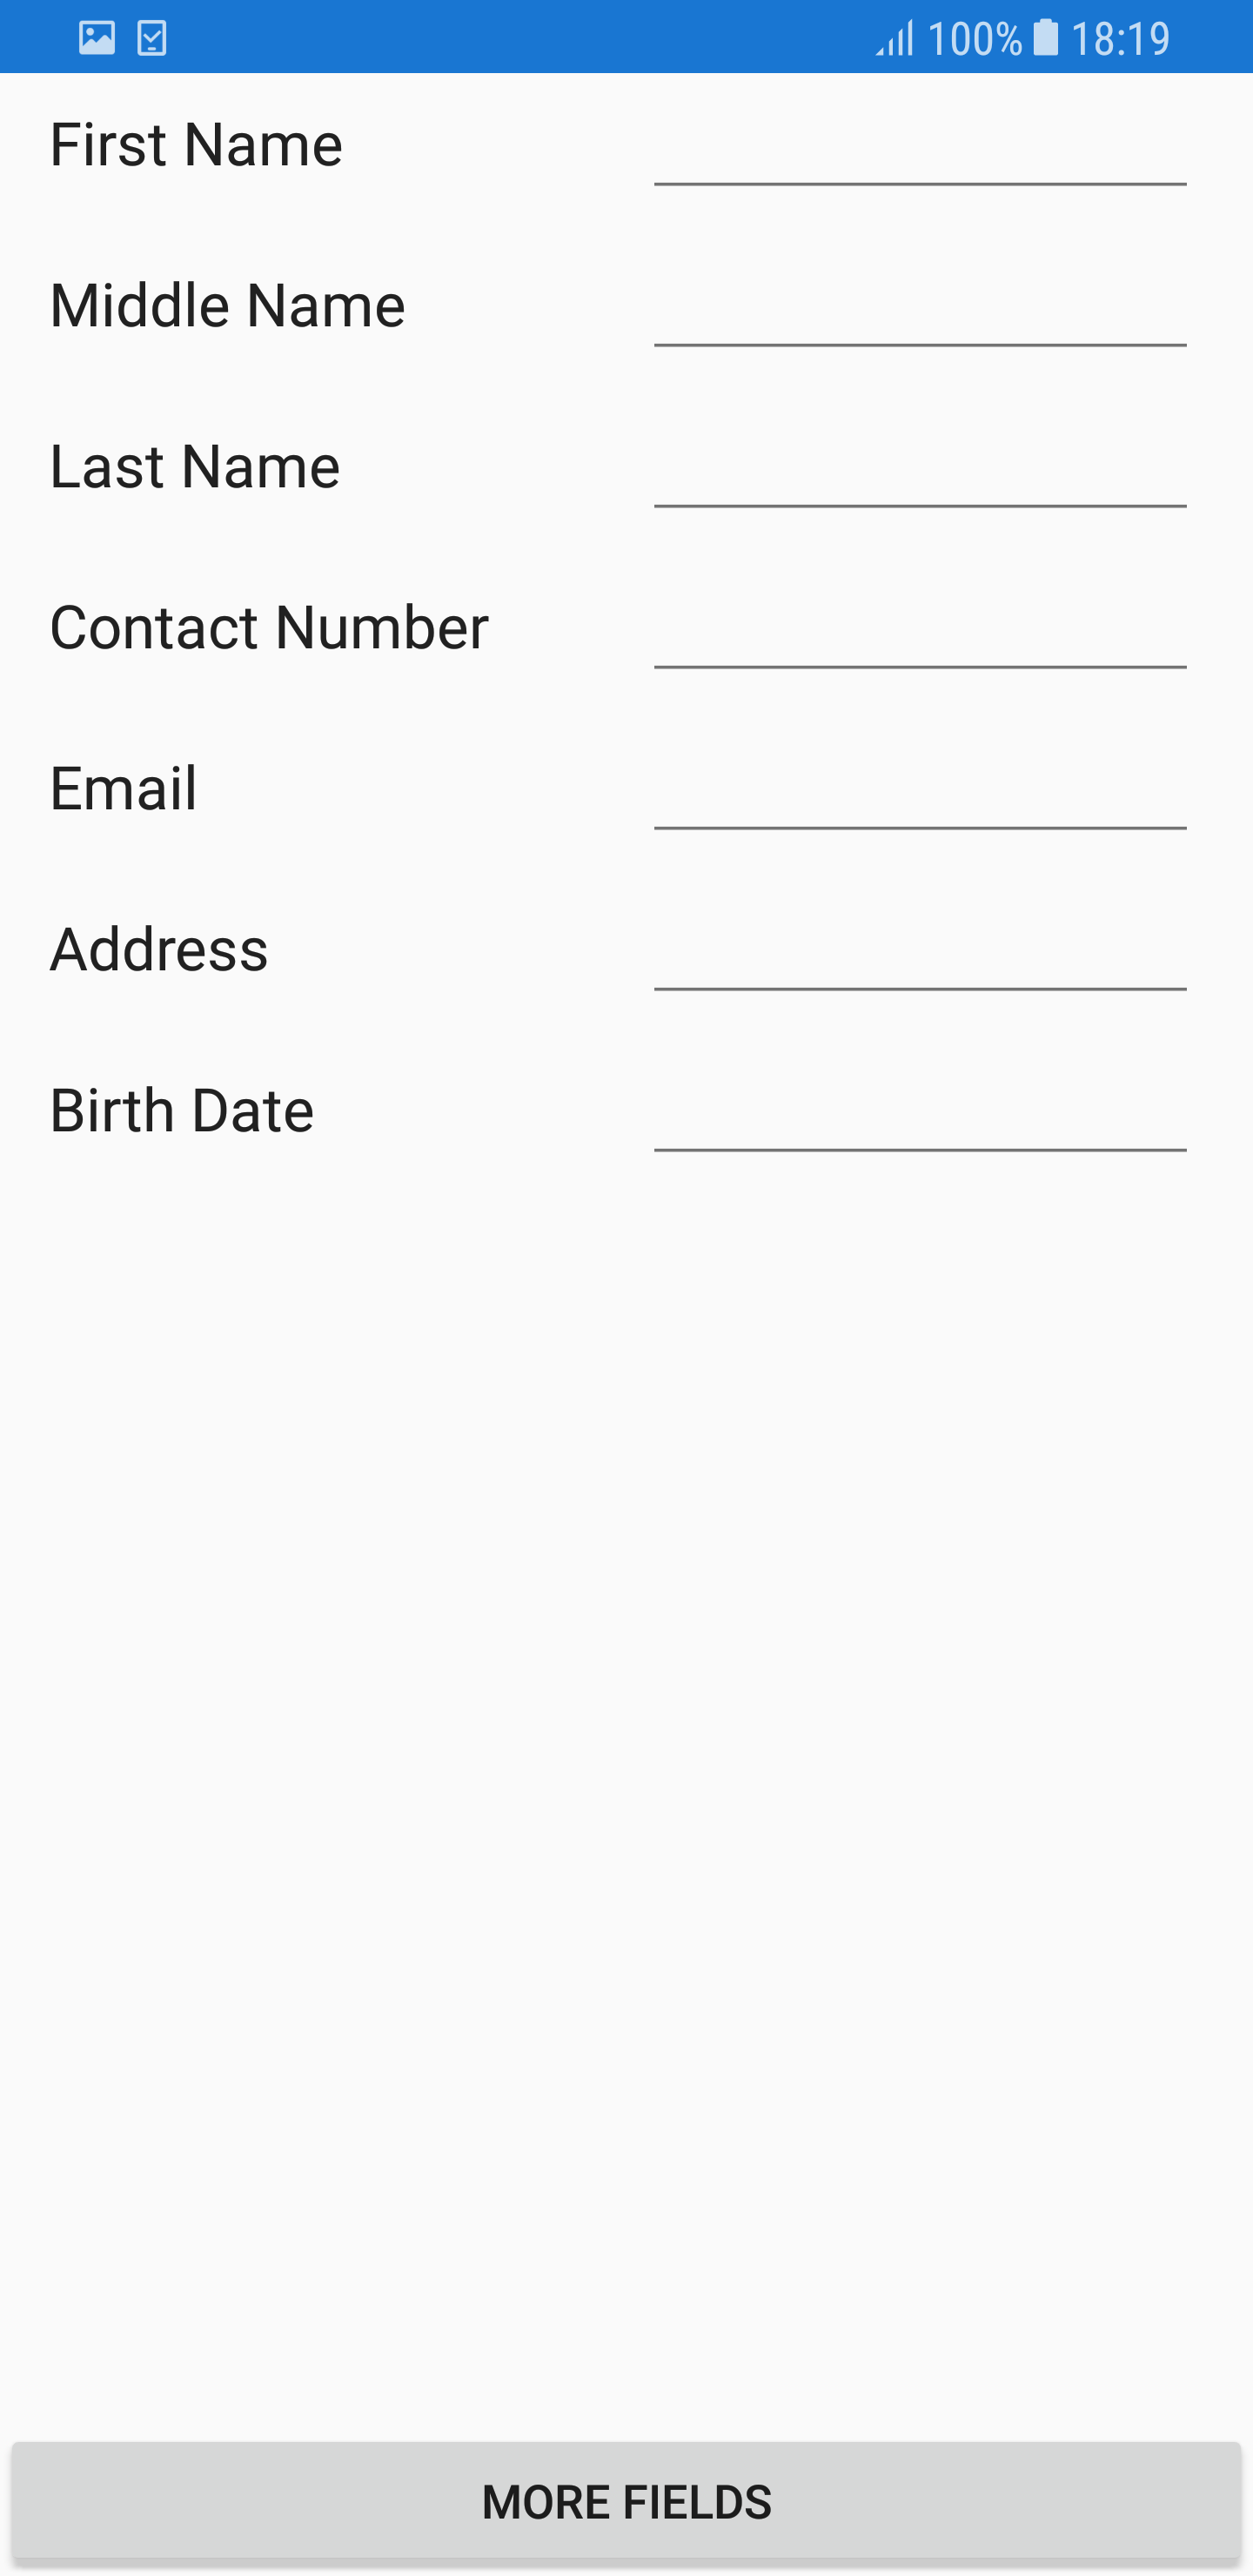 Removing data form fields at run time in Xamarin.Forms DataForm